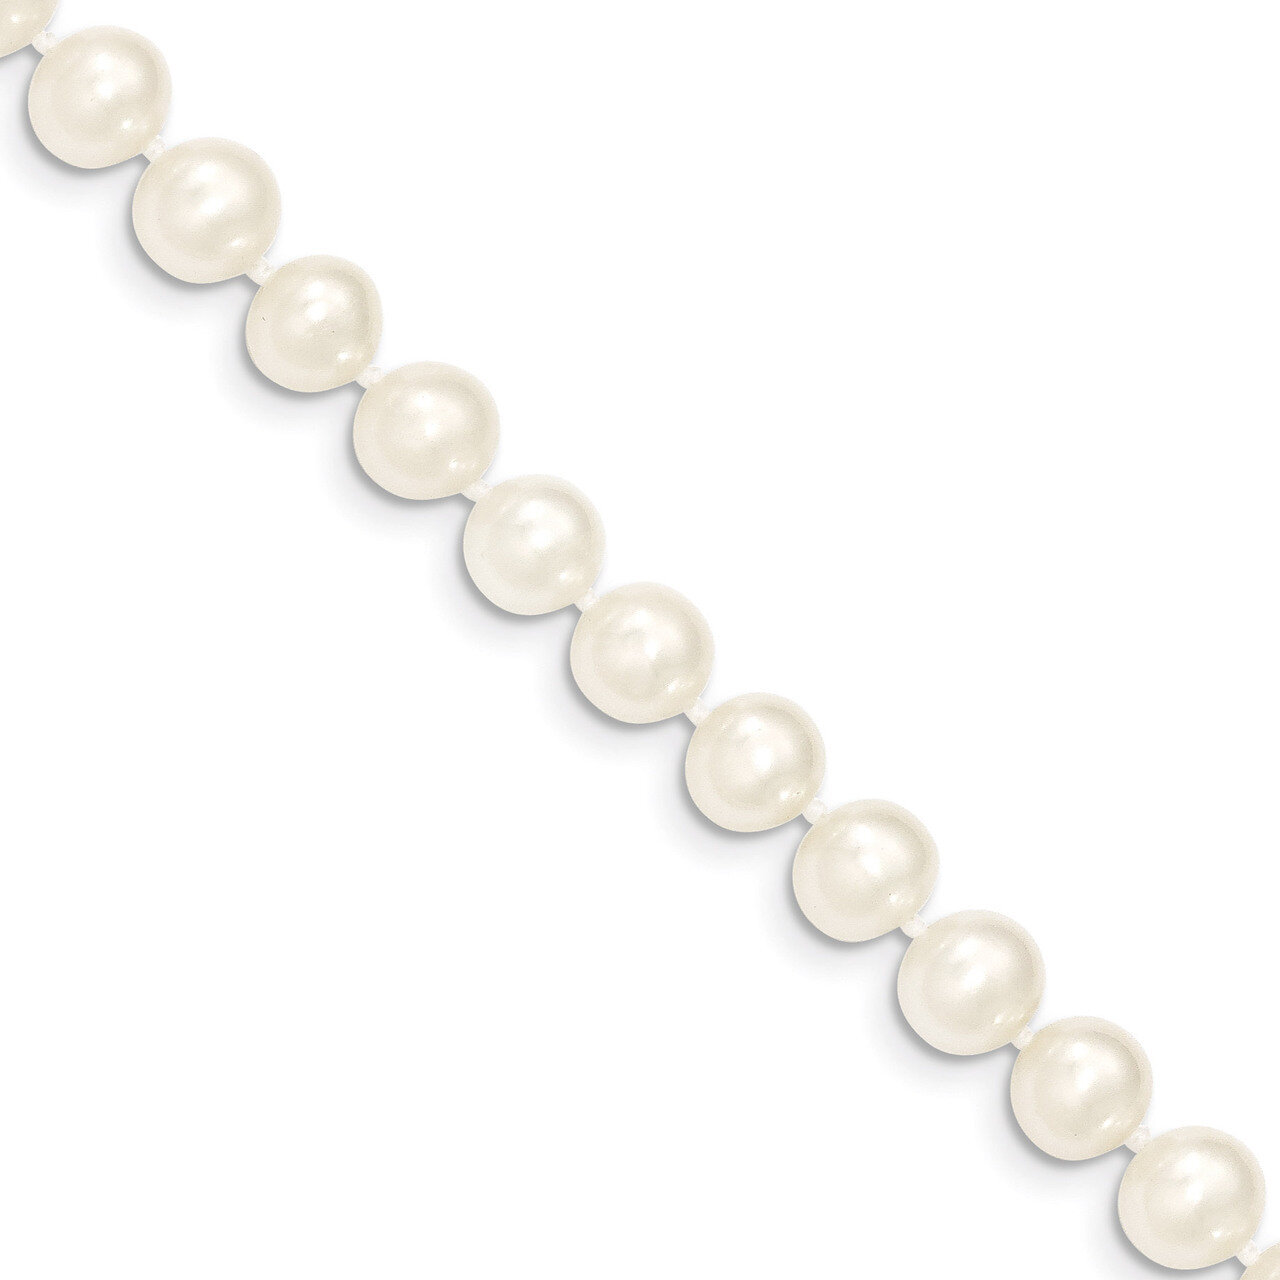 7-8mm White Cultured Near Round Pearl Necklace 18 Inch 14k Gold WPN070-18